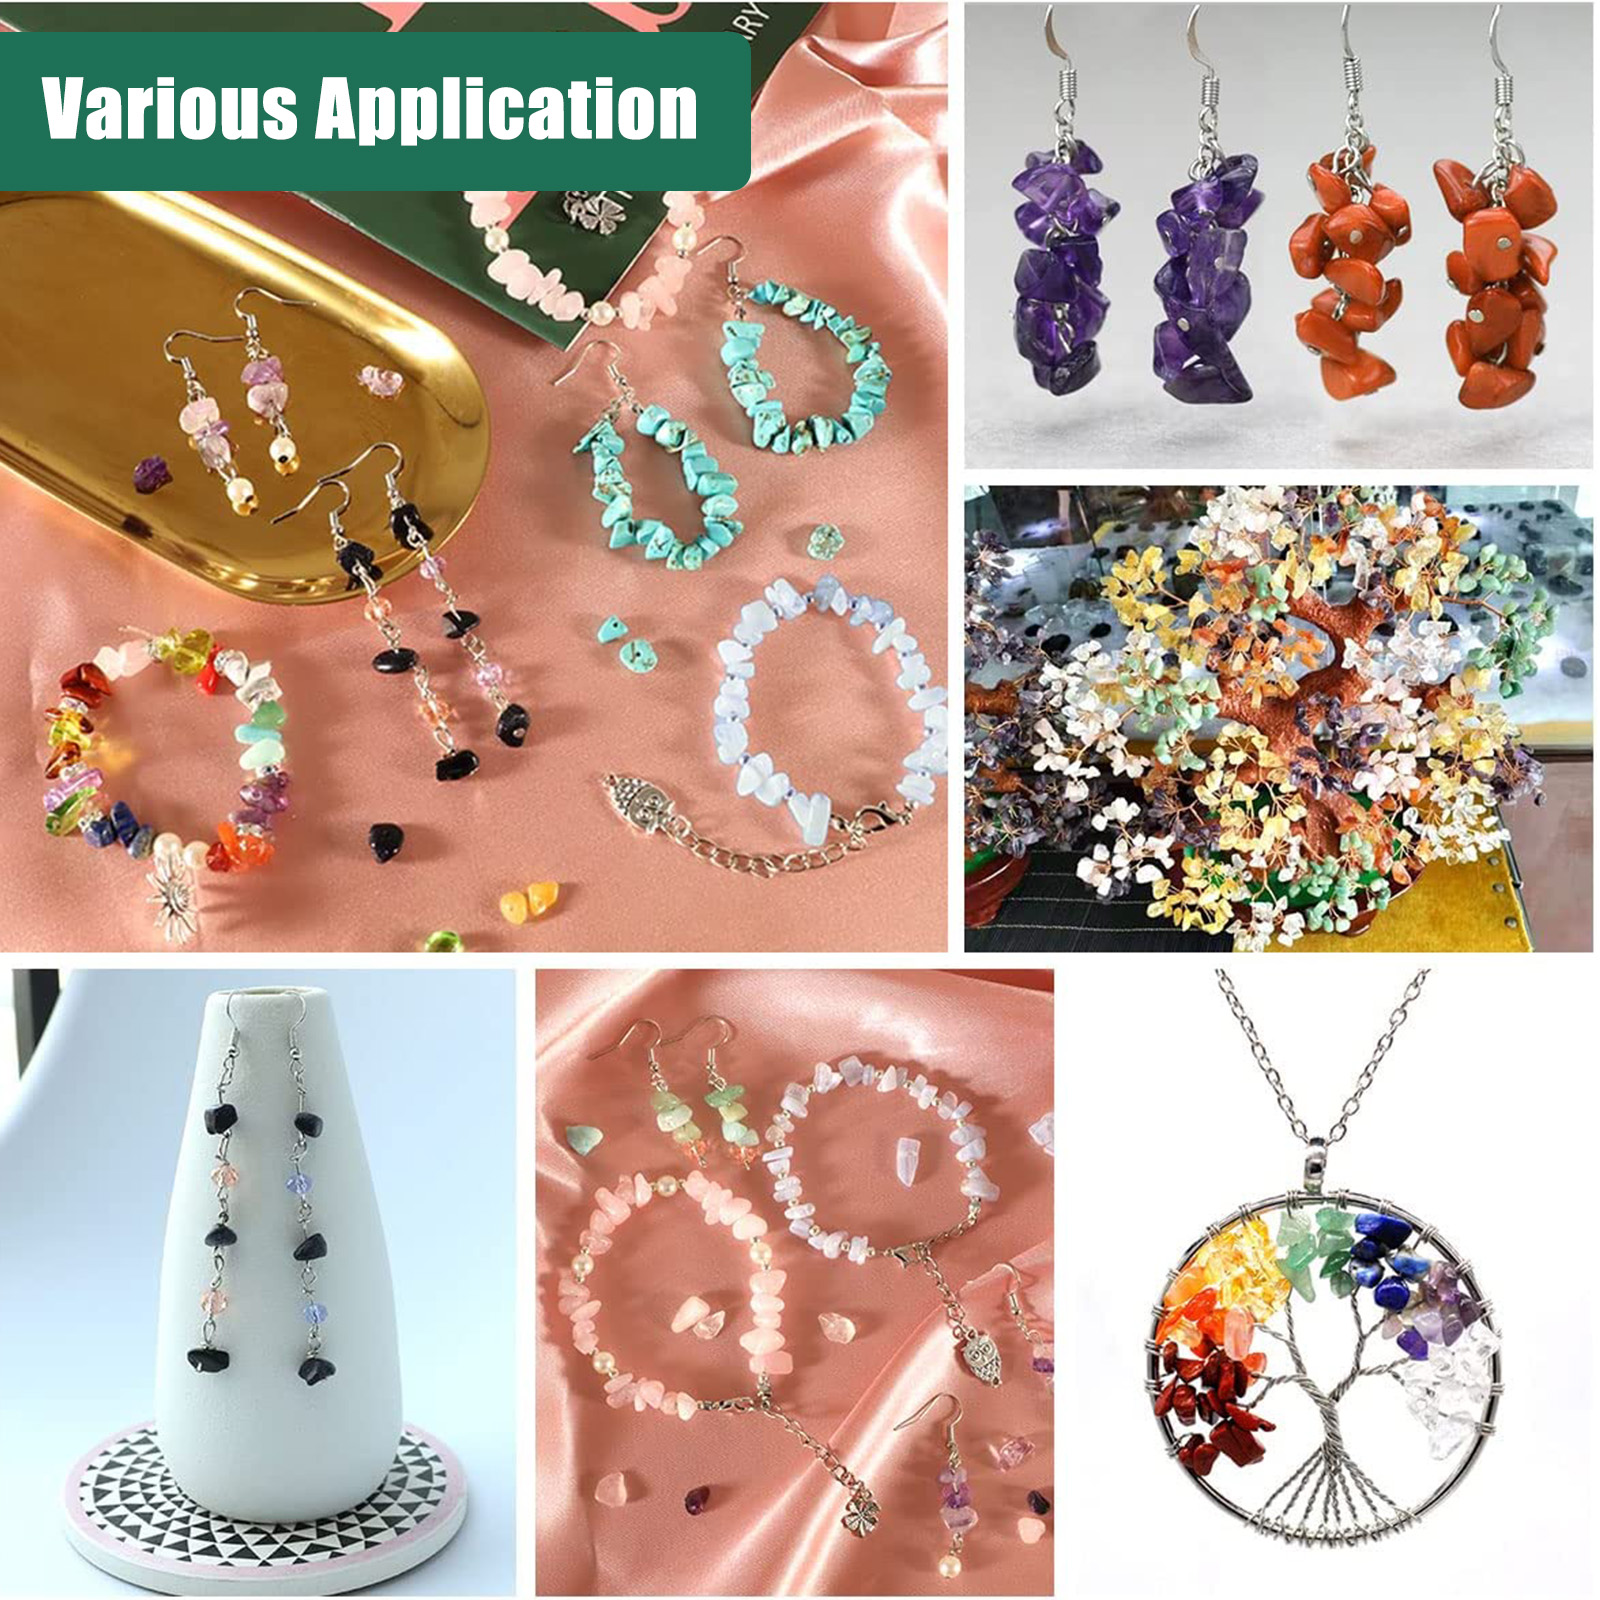 TSV 933pcs Natural Beads for Jewelry Making Kit, Irregular Chips Stone Gemstone Beads Kit with Earring Hooks Spacer Beads Pendants Charms Jump Rings for DIY Necklace Bracelet Earring Making - image 2 of 9